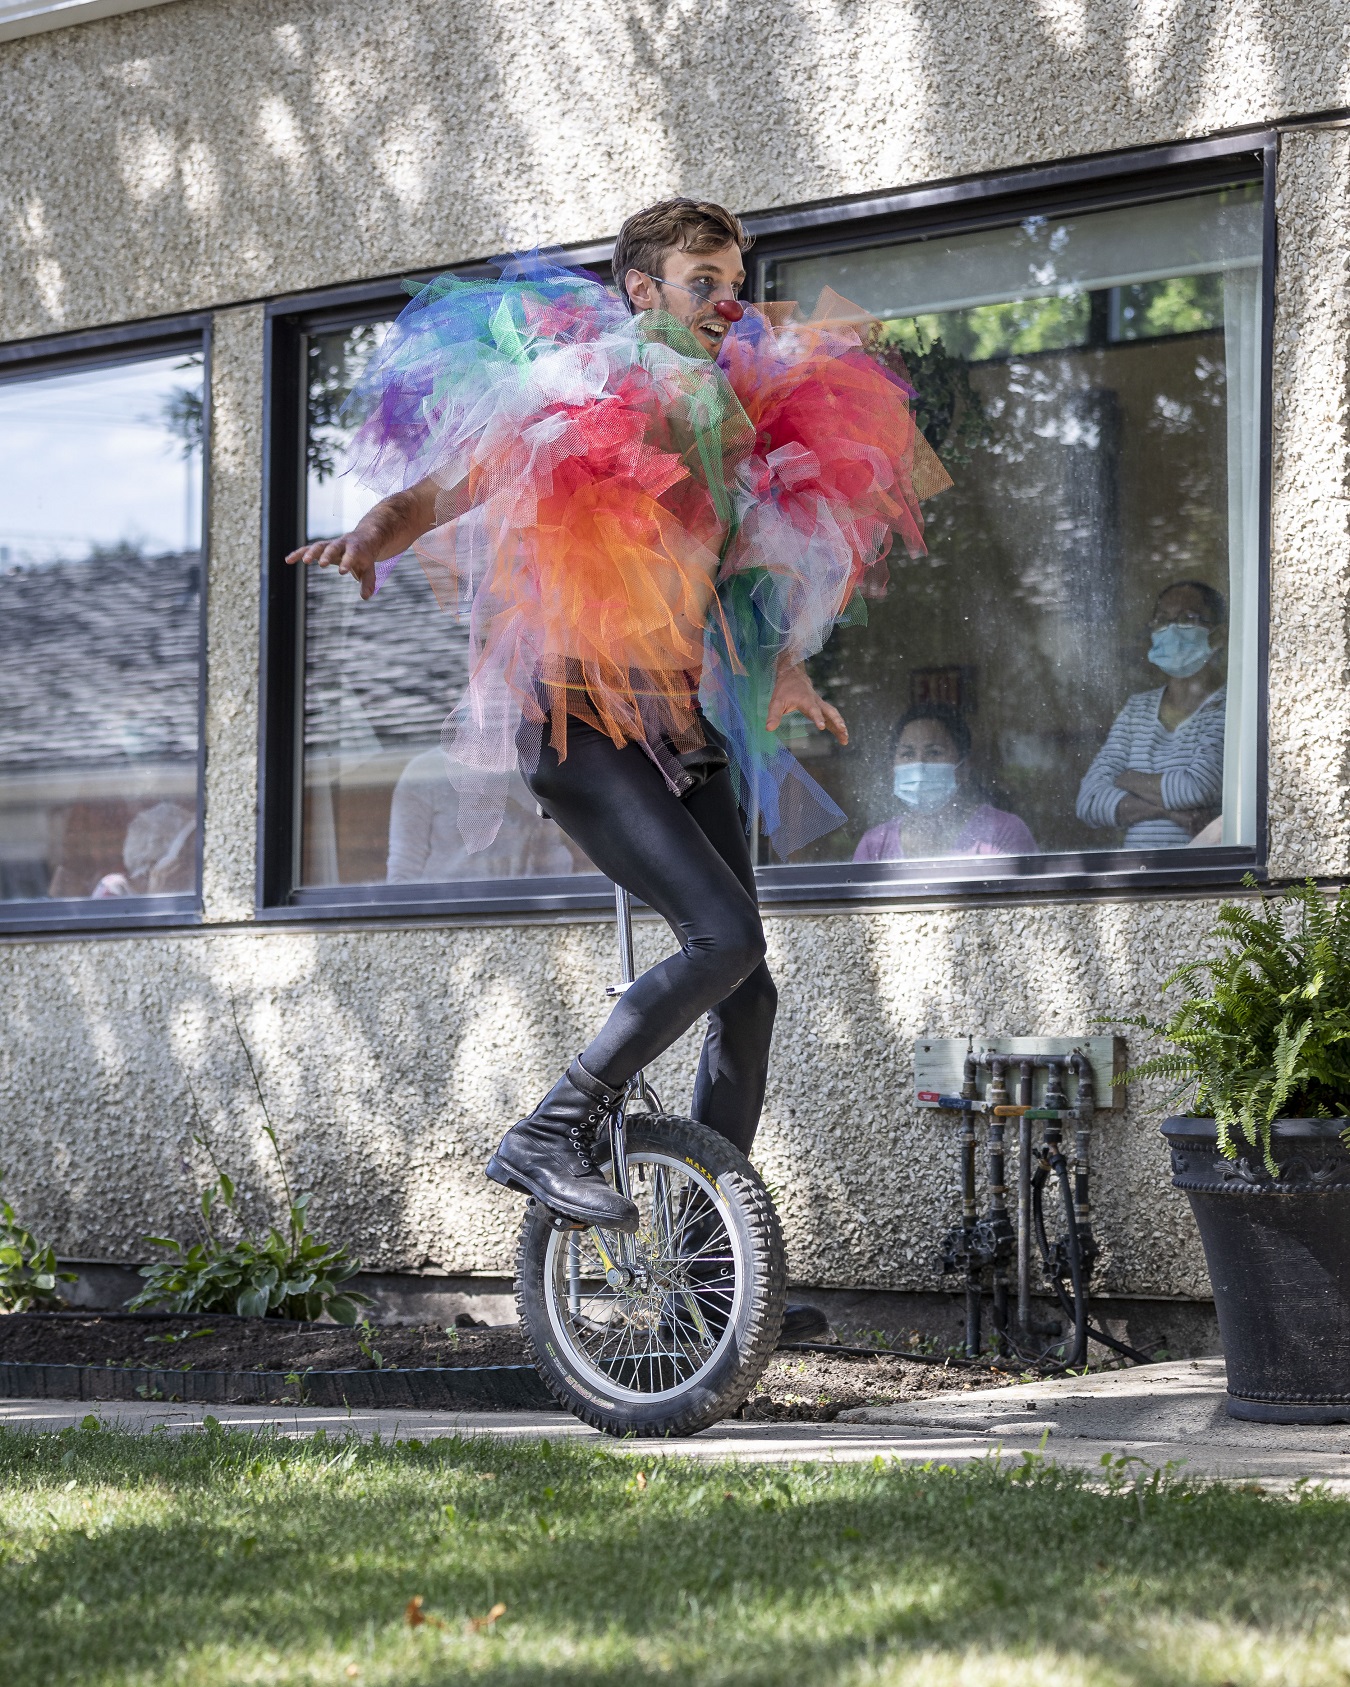 A man dressed as a clown rides a unicycle.